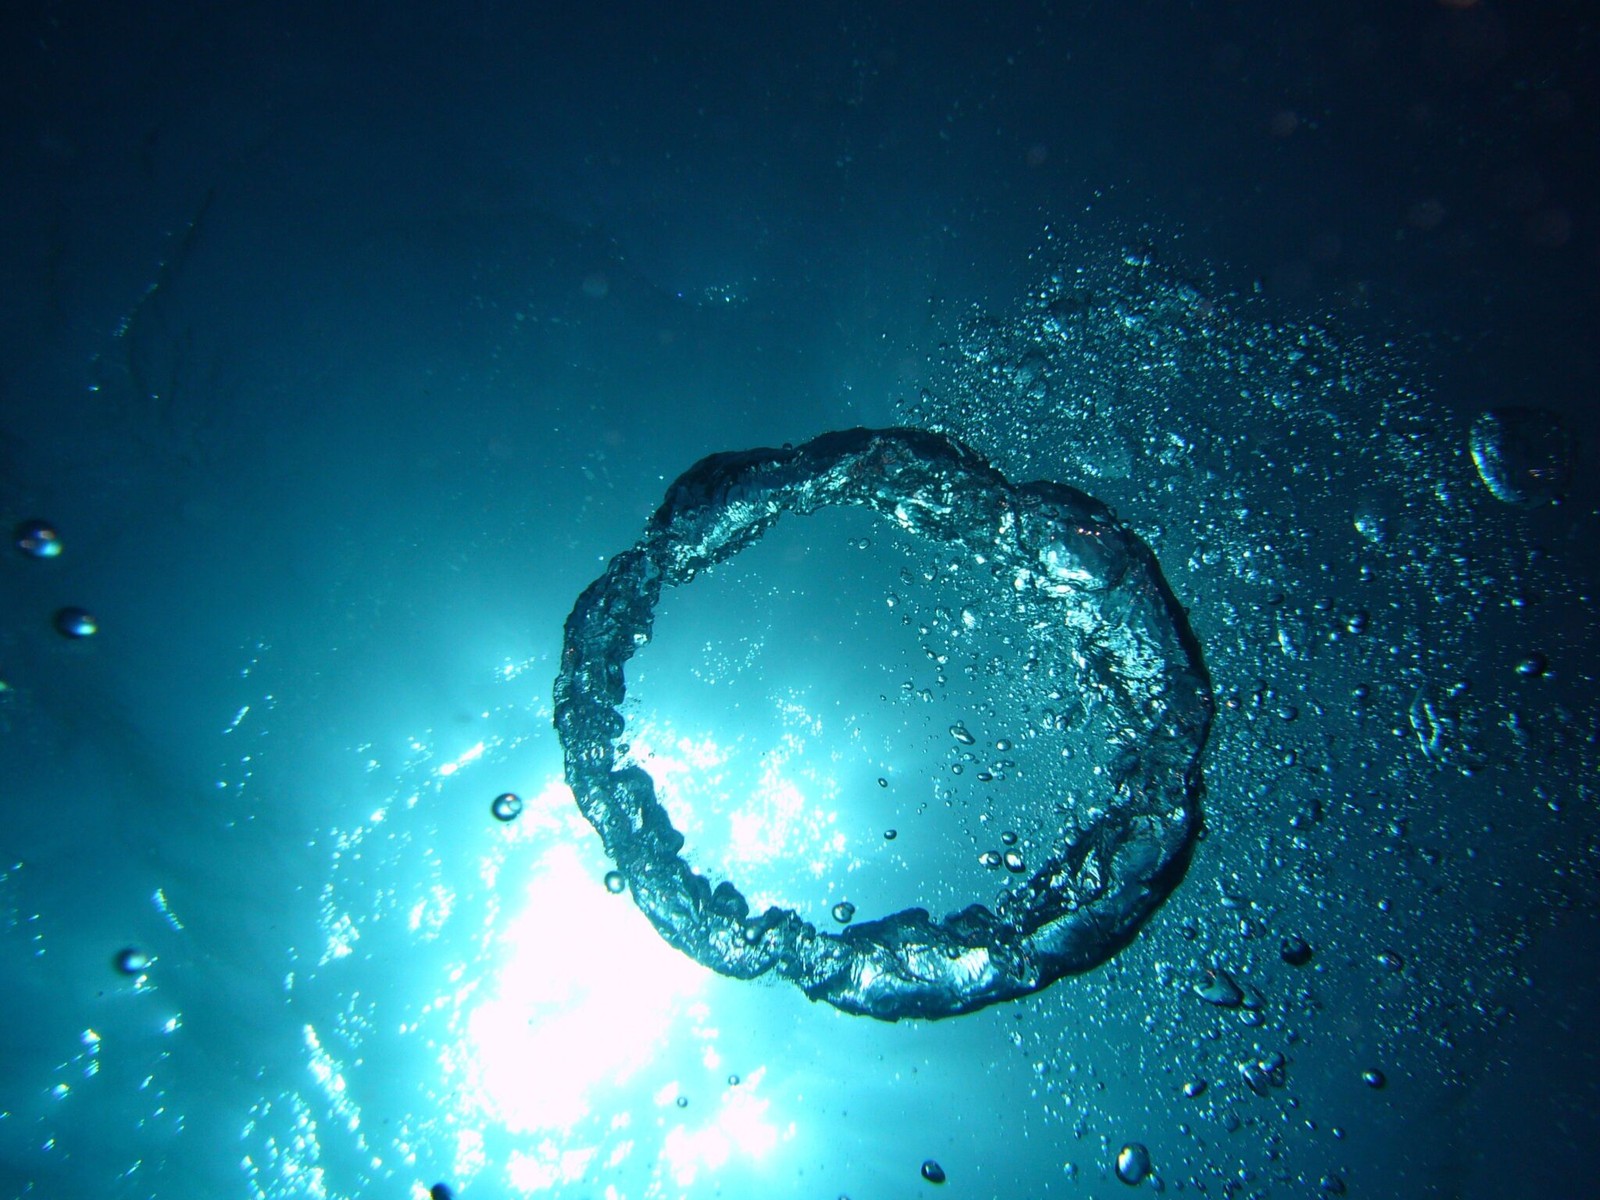 Ring bubble under water. Free publci domain CC0 photo.
More:
 View public domain image source here
